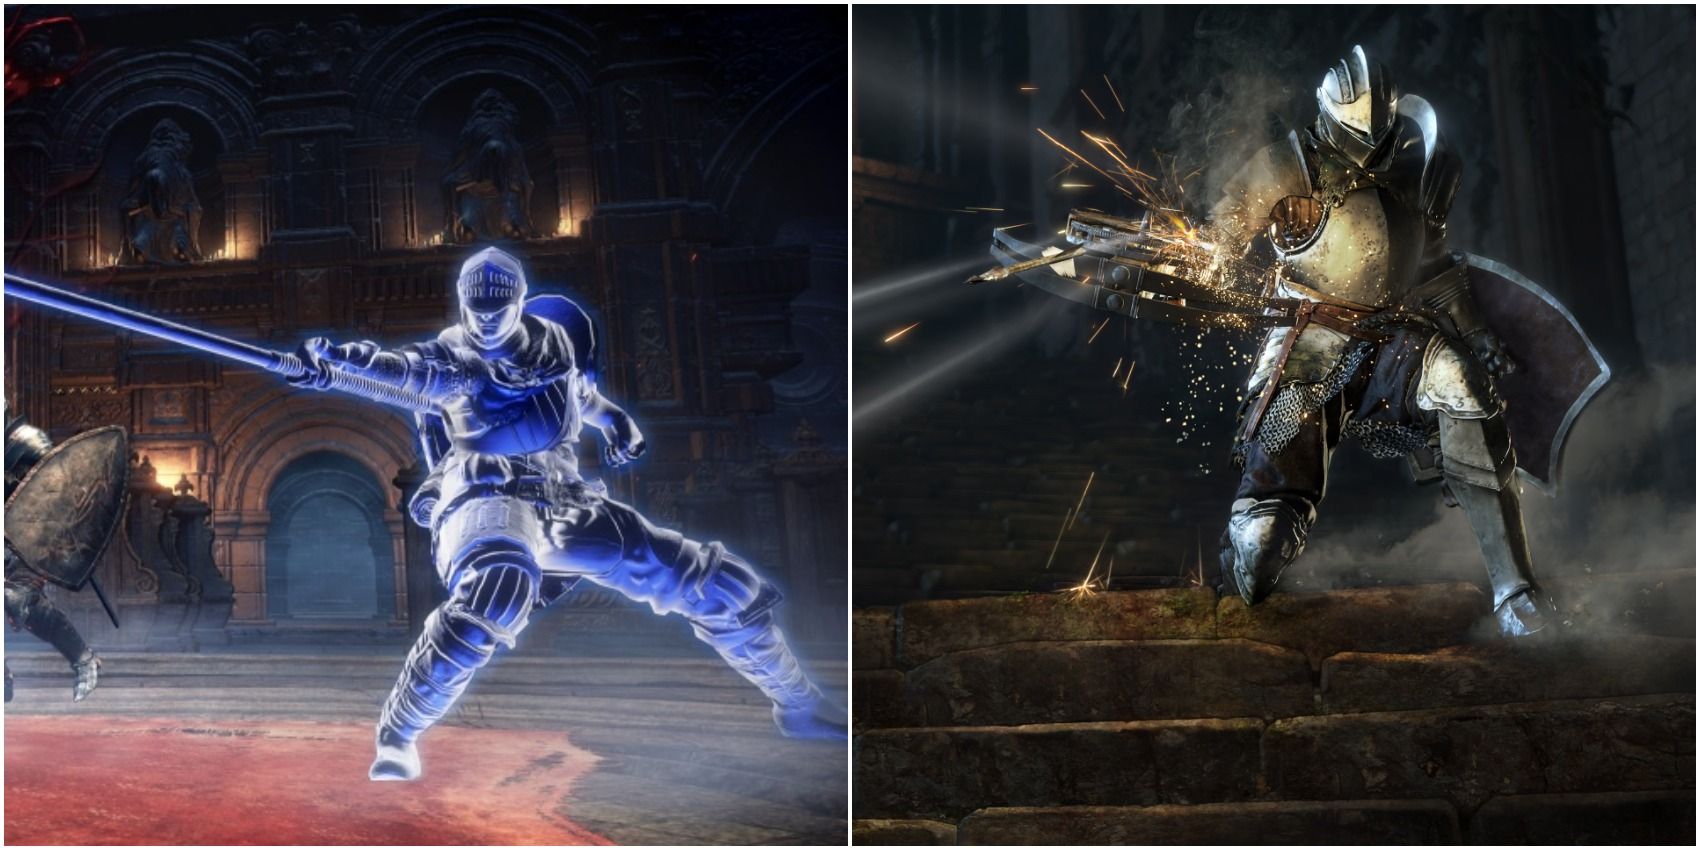 Dark Souls 3 Featured Image. Blue Sentinel Defending Host And Repeating Crossbow.